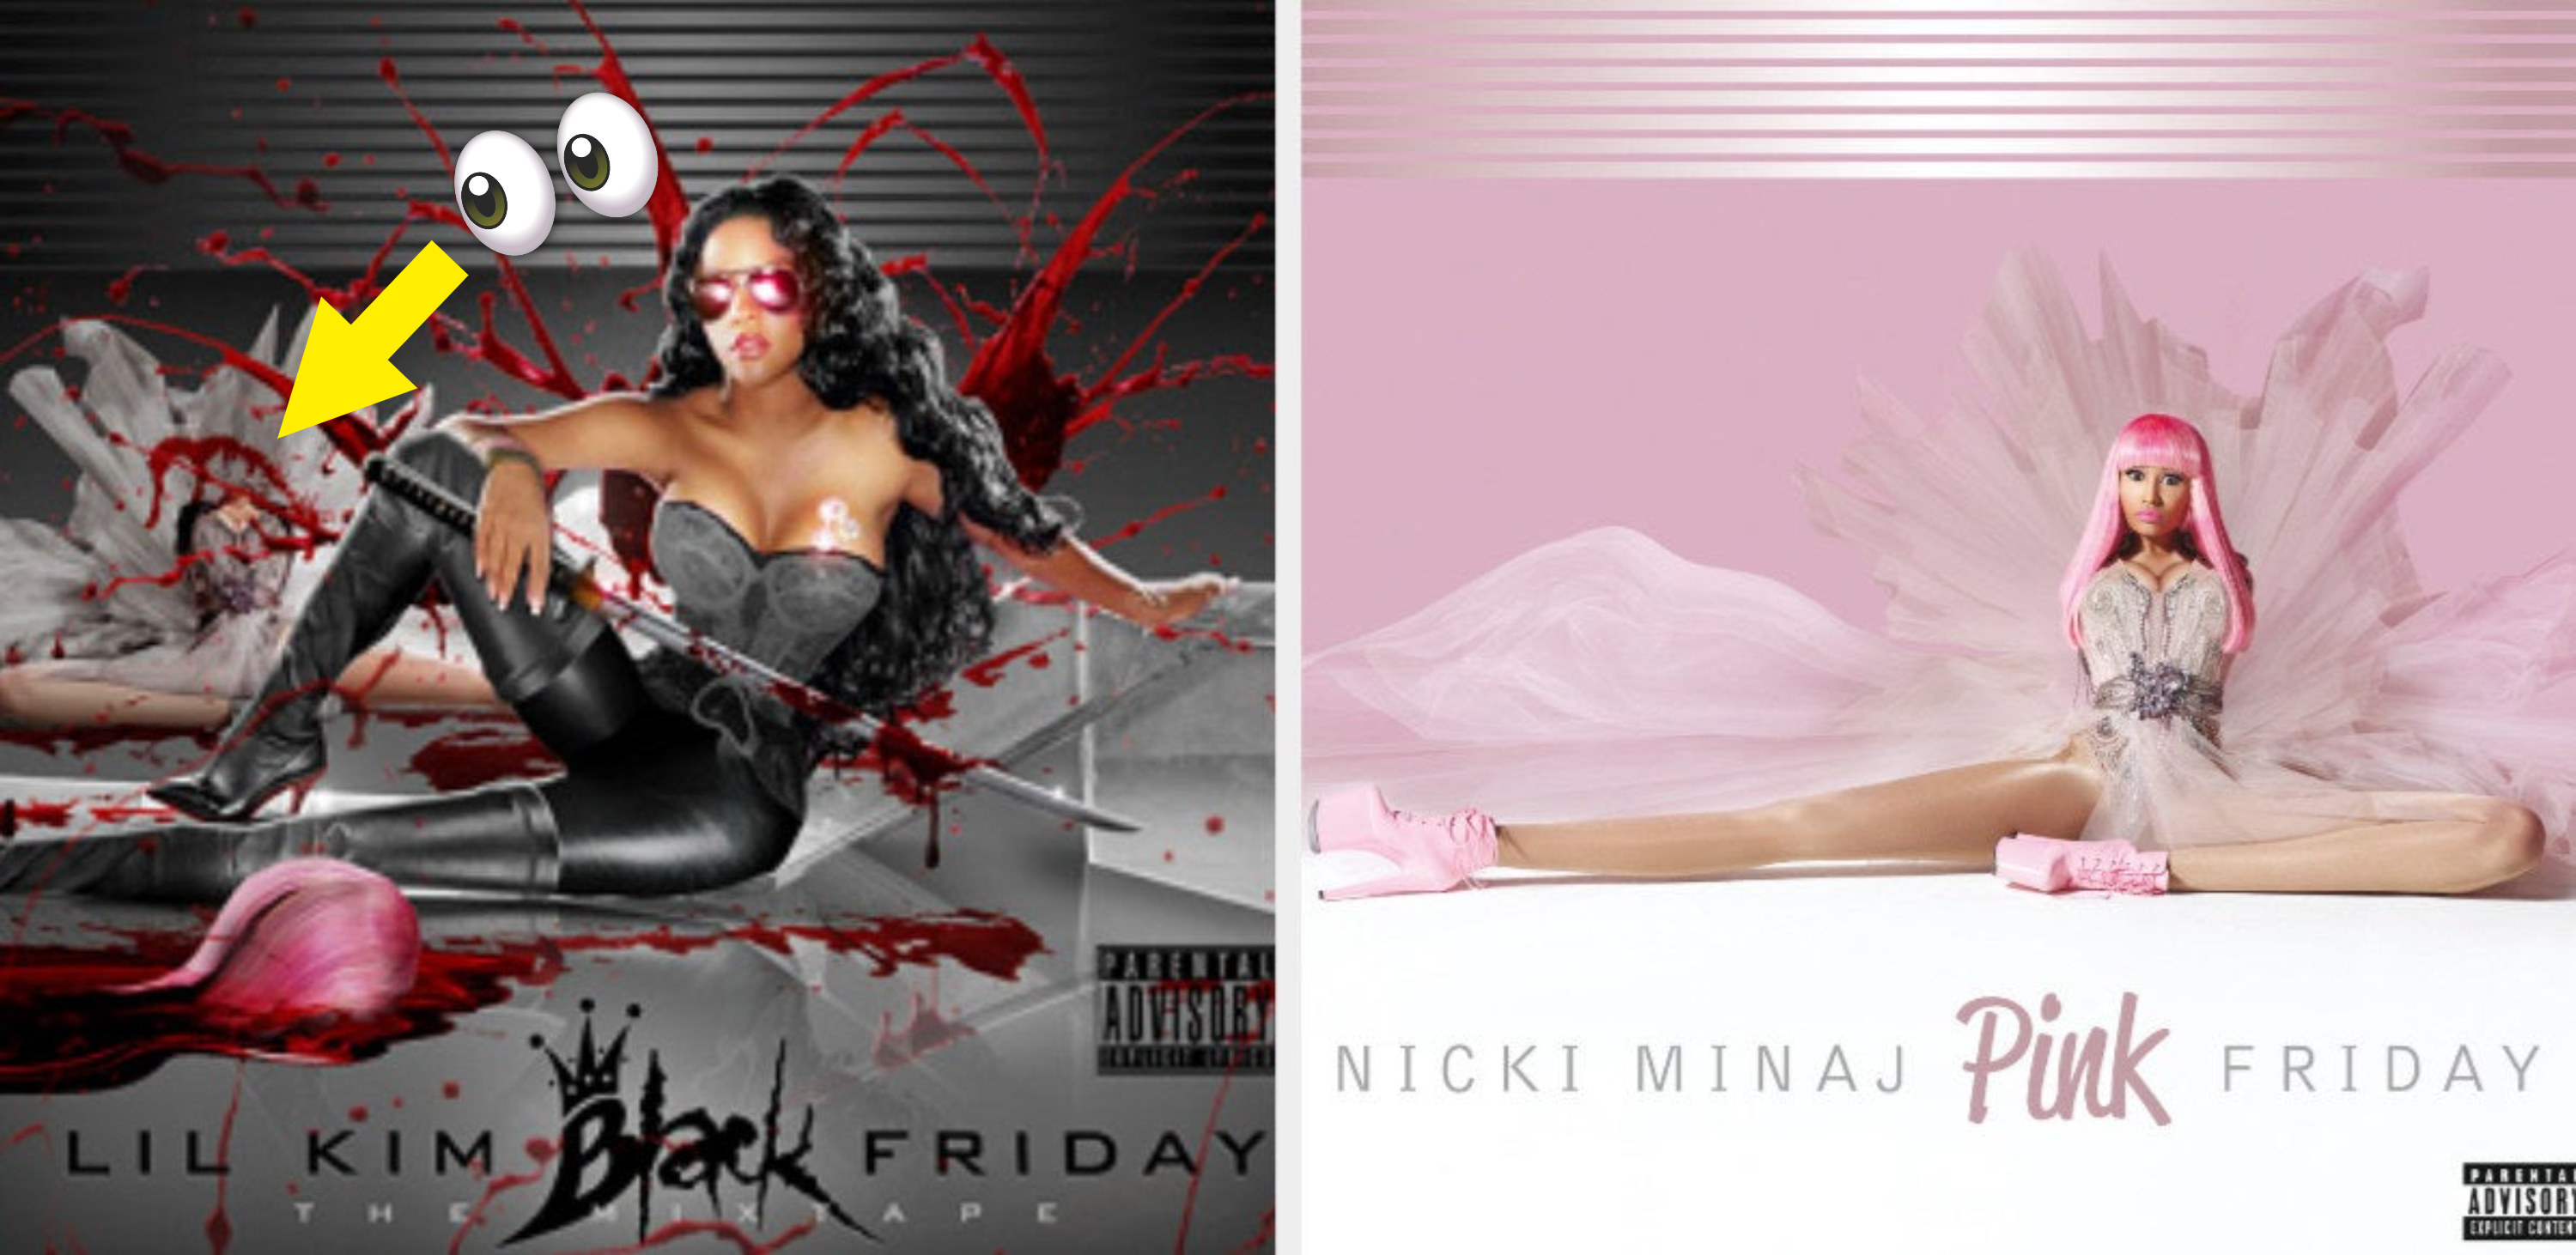 Lil&#x27; Kim&#x27;s mixtape cover for &quot;Black Friday;&quot; Nicki Minaj&#x27;s album cover for &quot;Pink Friday&quot;